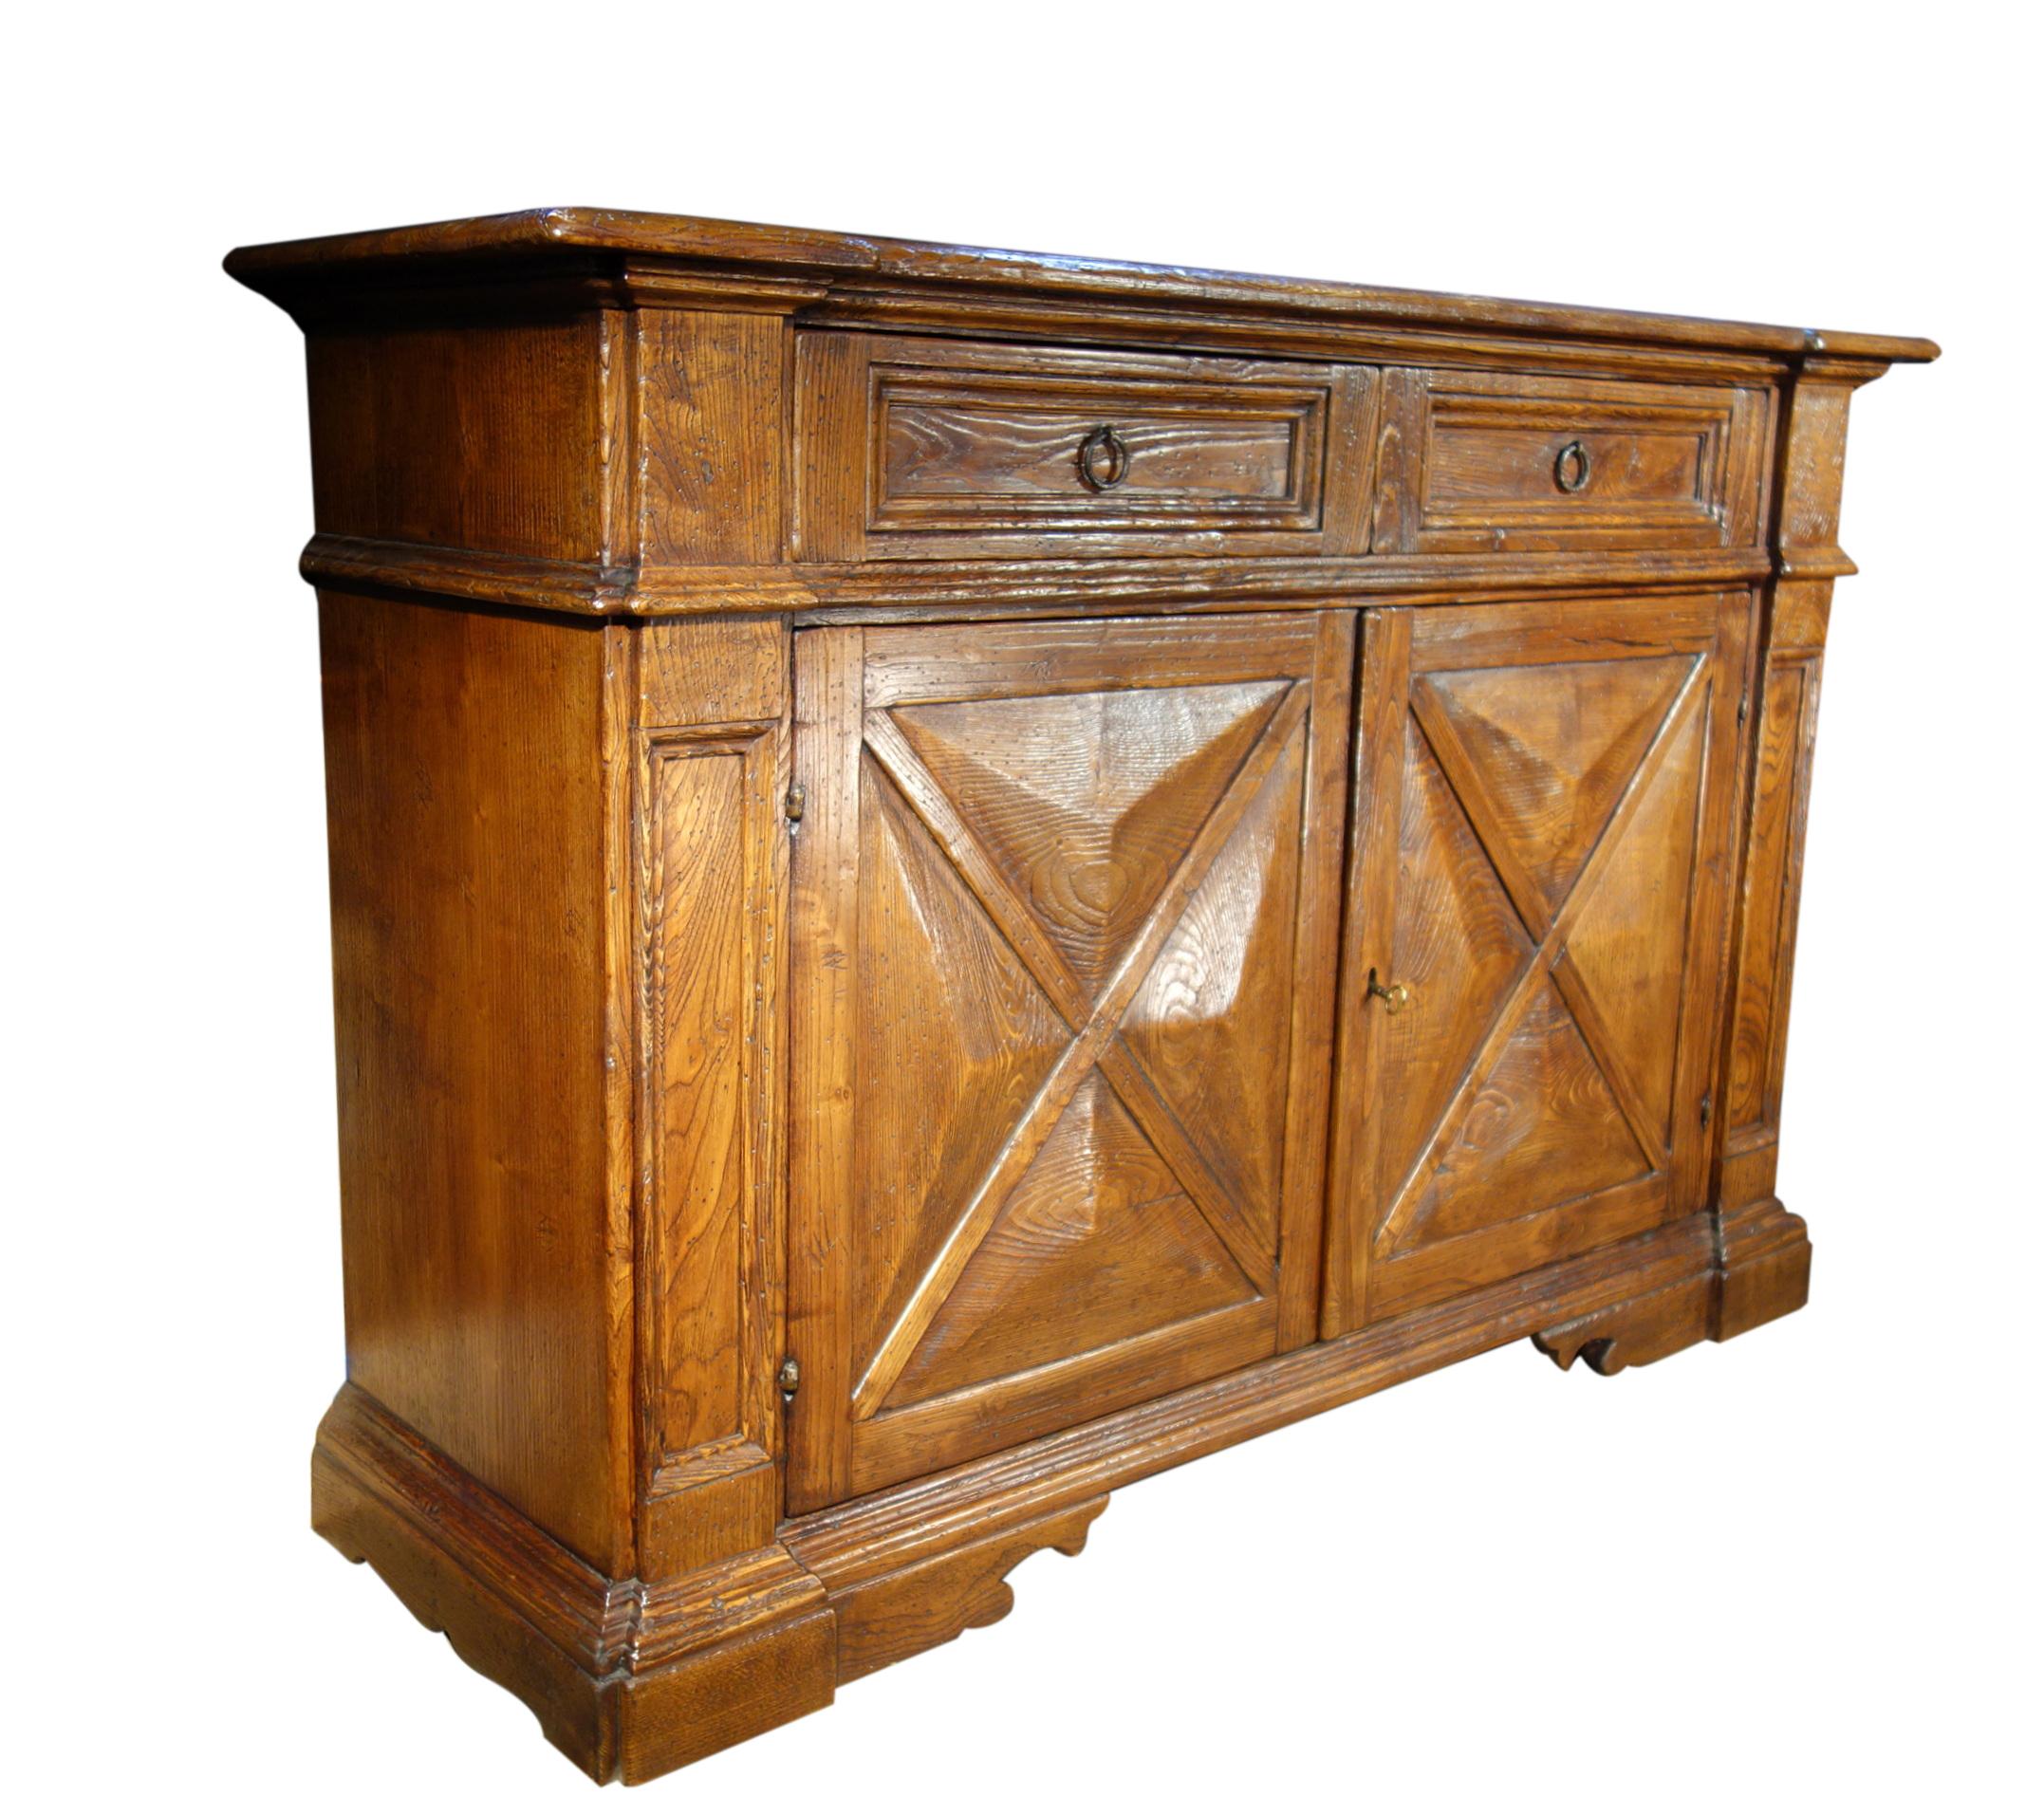 Our 17th century style “AREZZO Grande” credenza - The Italian Art & Handcraft of Fine Antique Reproduction

The Arezzo Grande Old Chestnut credenza features 2 doors + 2 drawers, handcrafted in Italian aged chestnut solid hardwoods brushed to